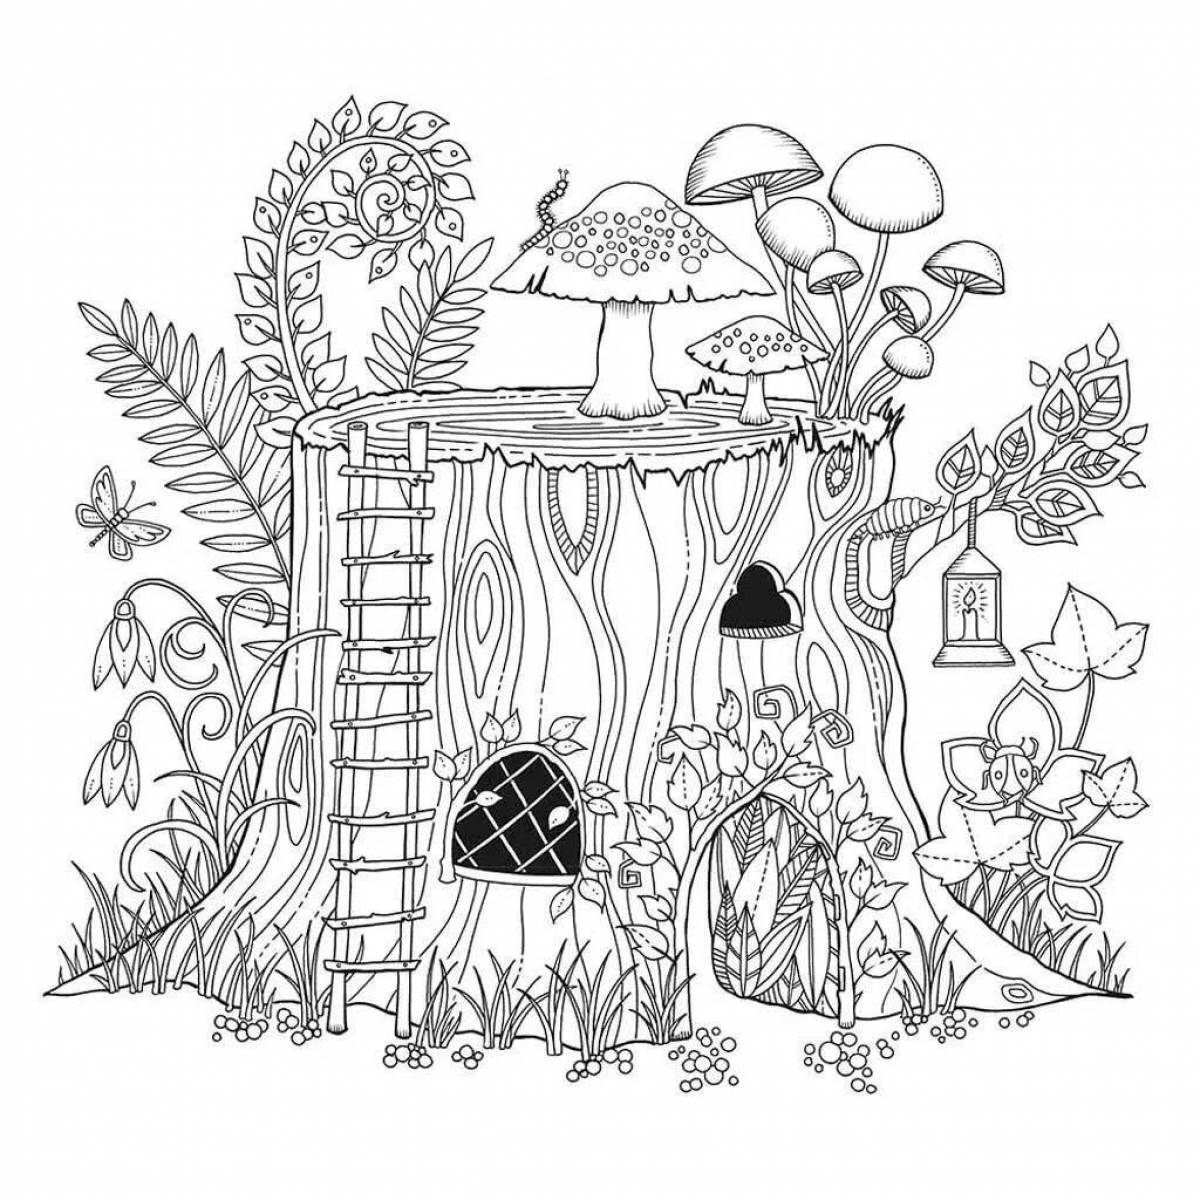 Charming forest coloring book